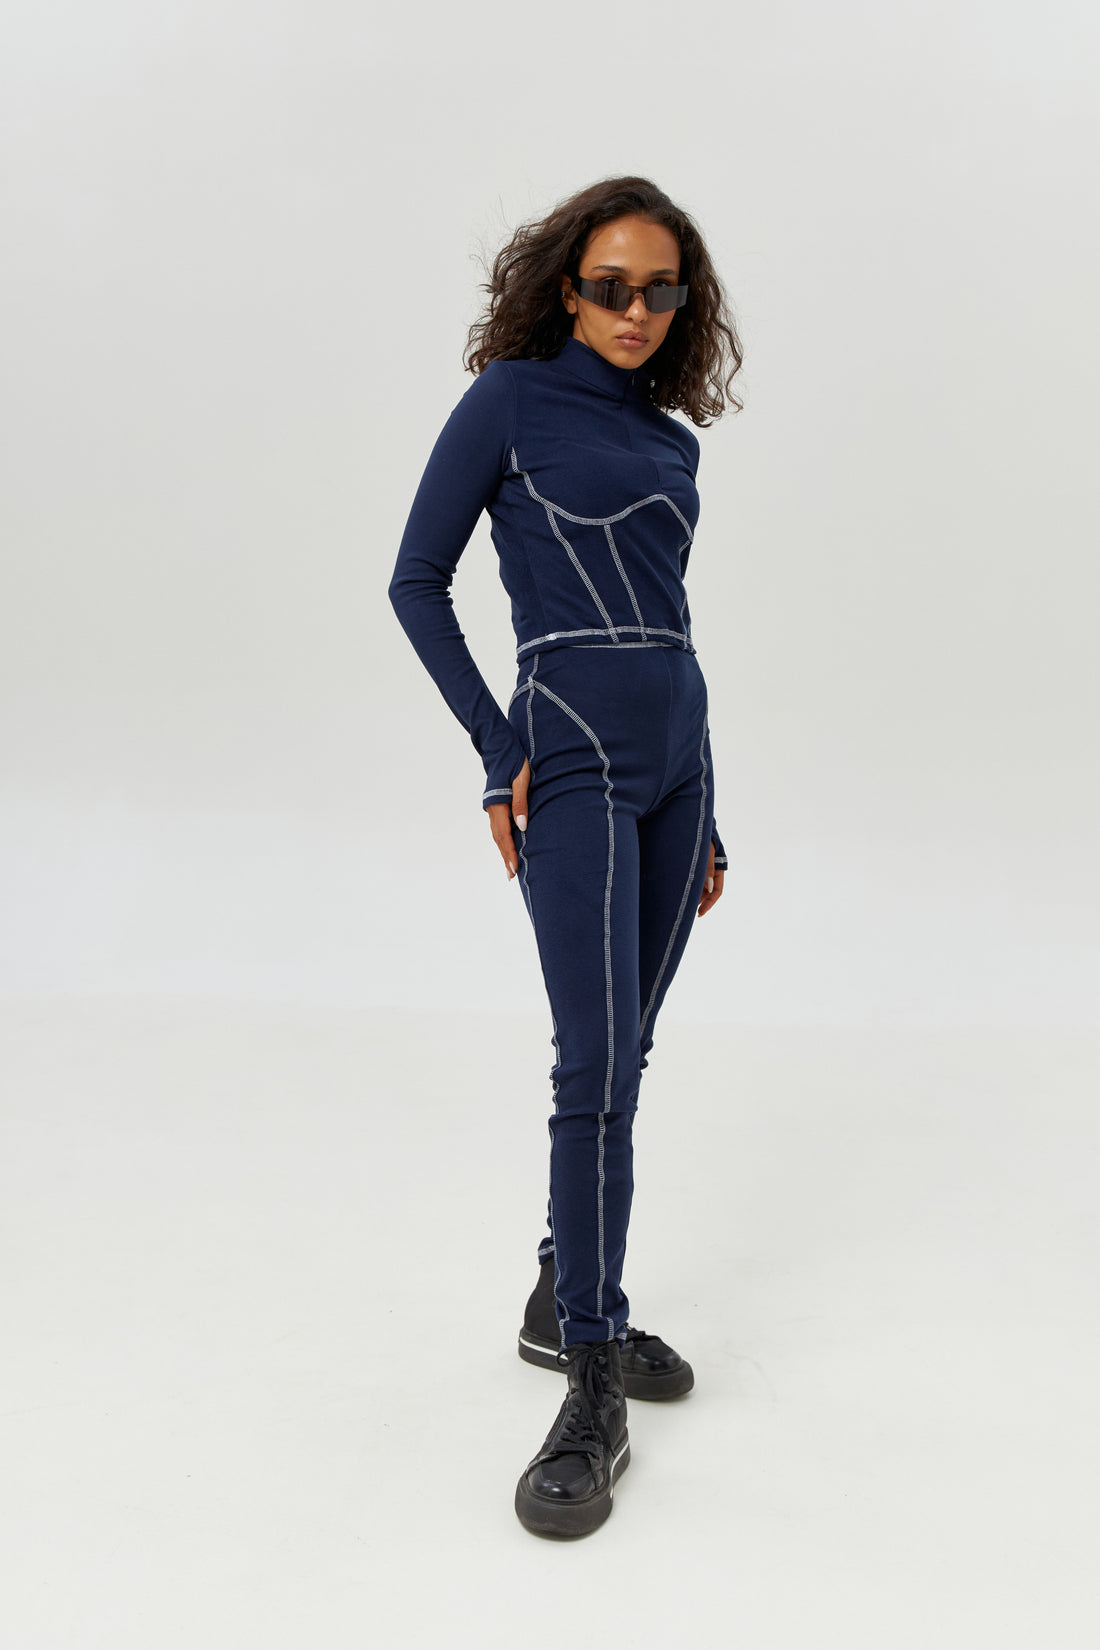 Base layers for skiing women's - Navy blue two piece set for